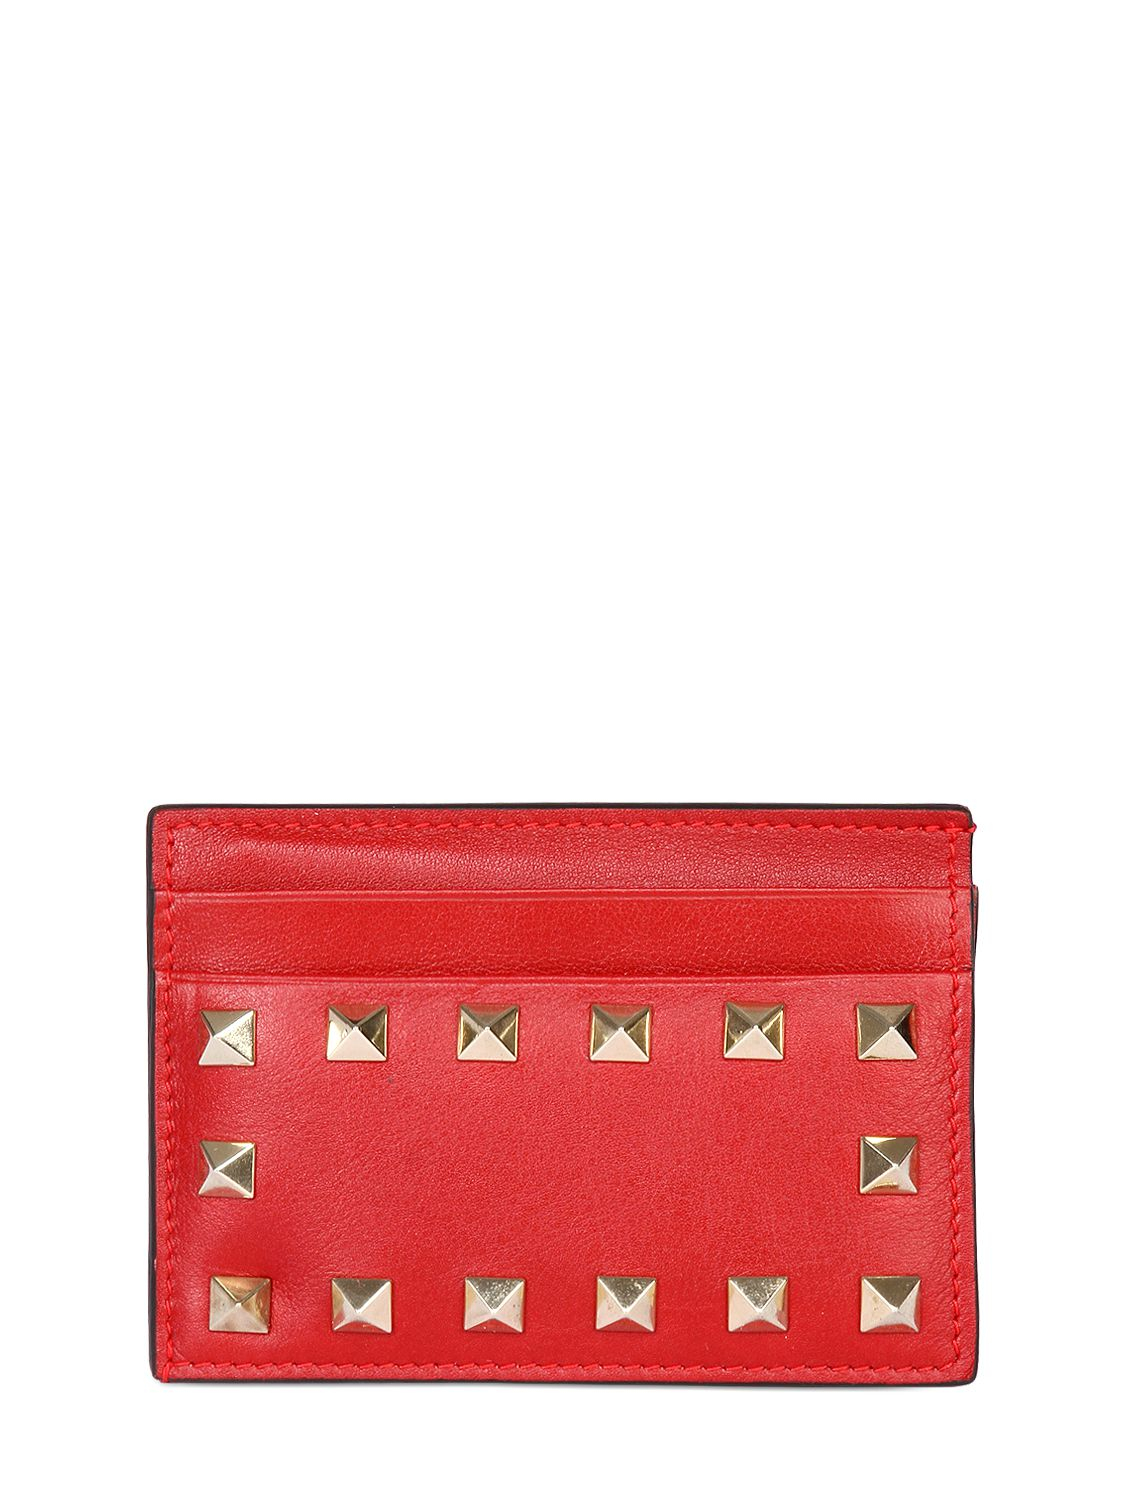 Valentino Rockstud Leather Card Holder in Red (RED VALENTINO)